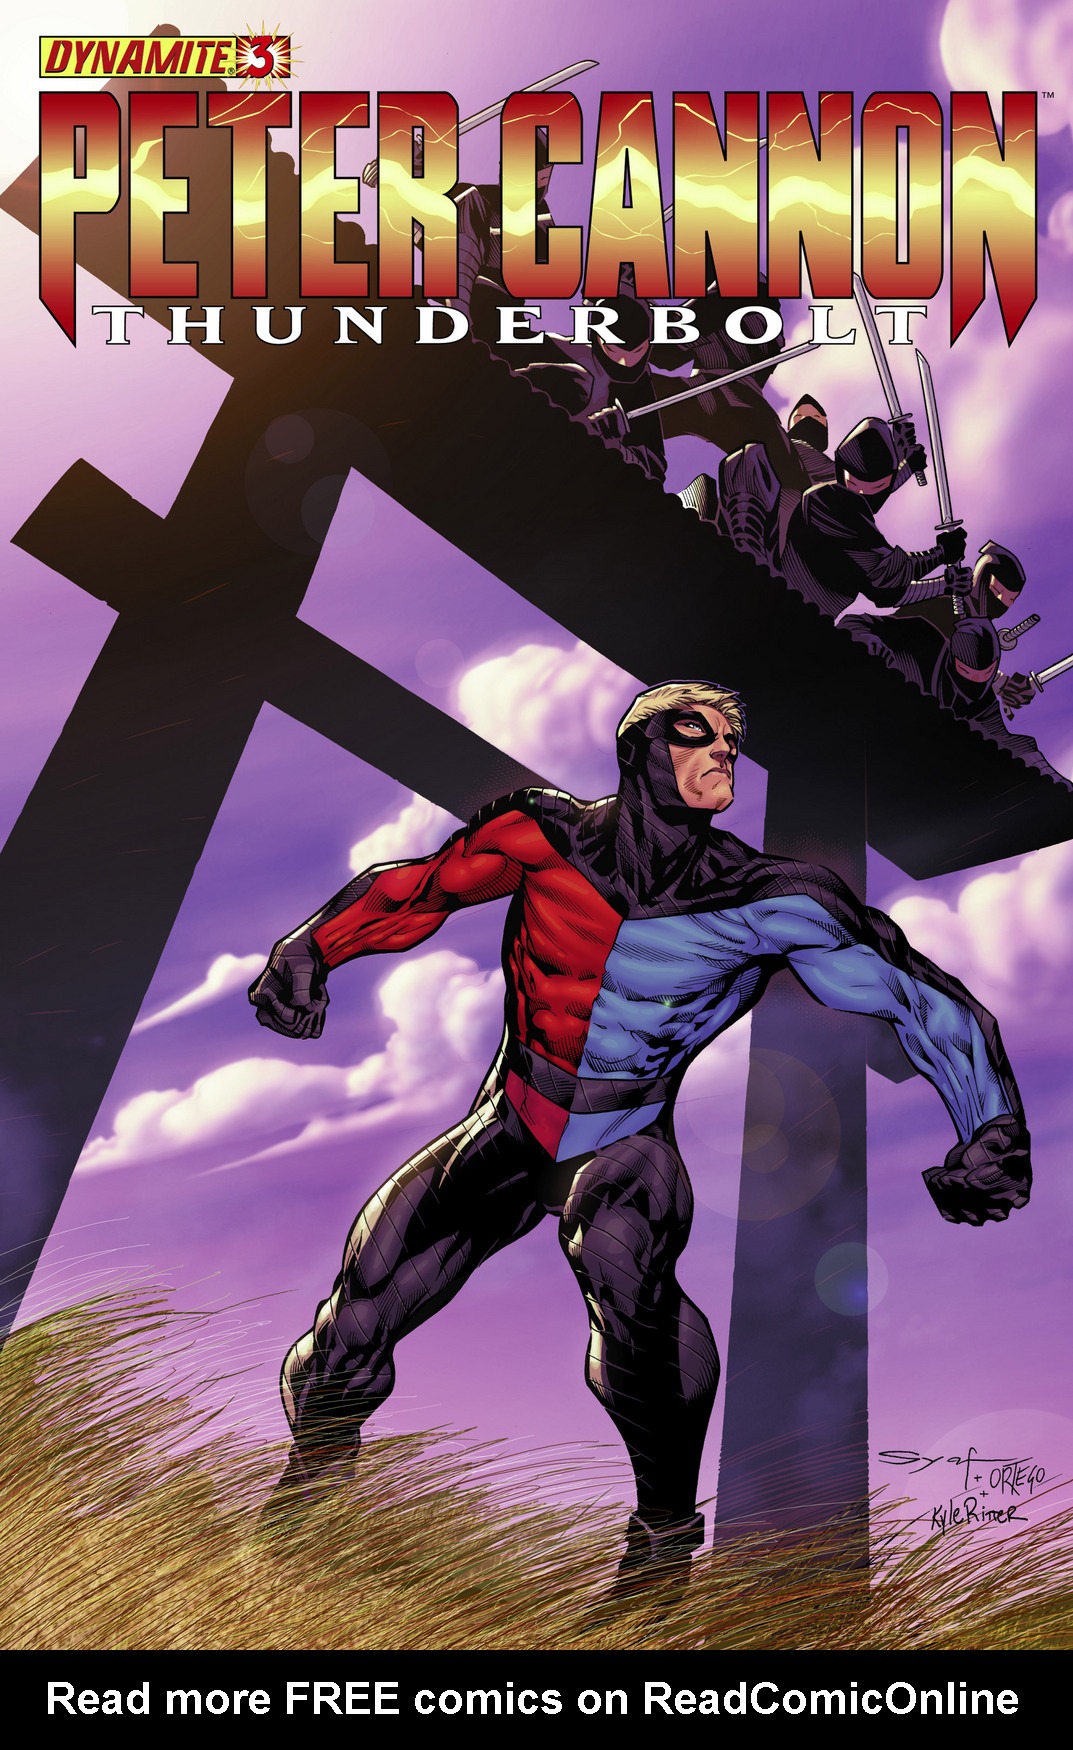 Read online Peter Cannon: Thunderbolt comic -  Issue #3 - 3